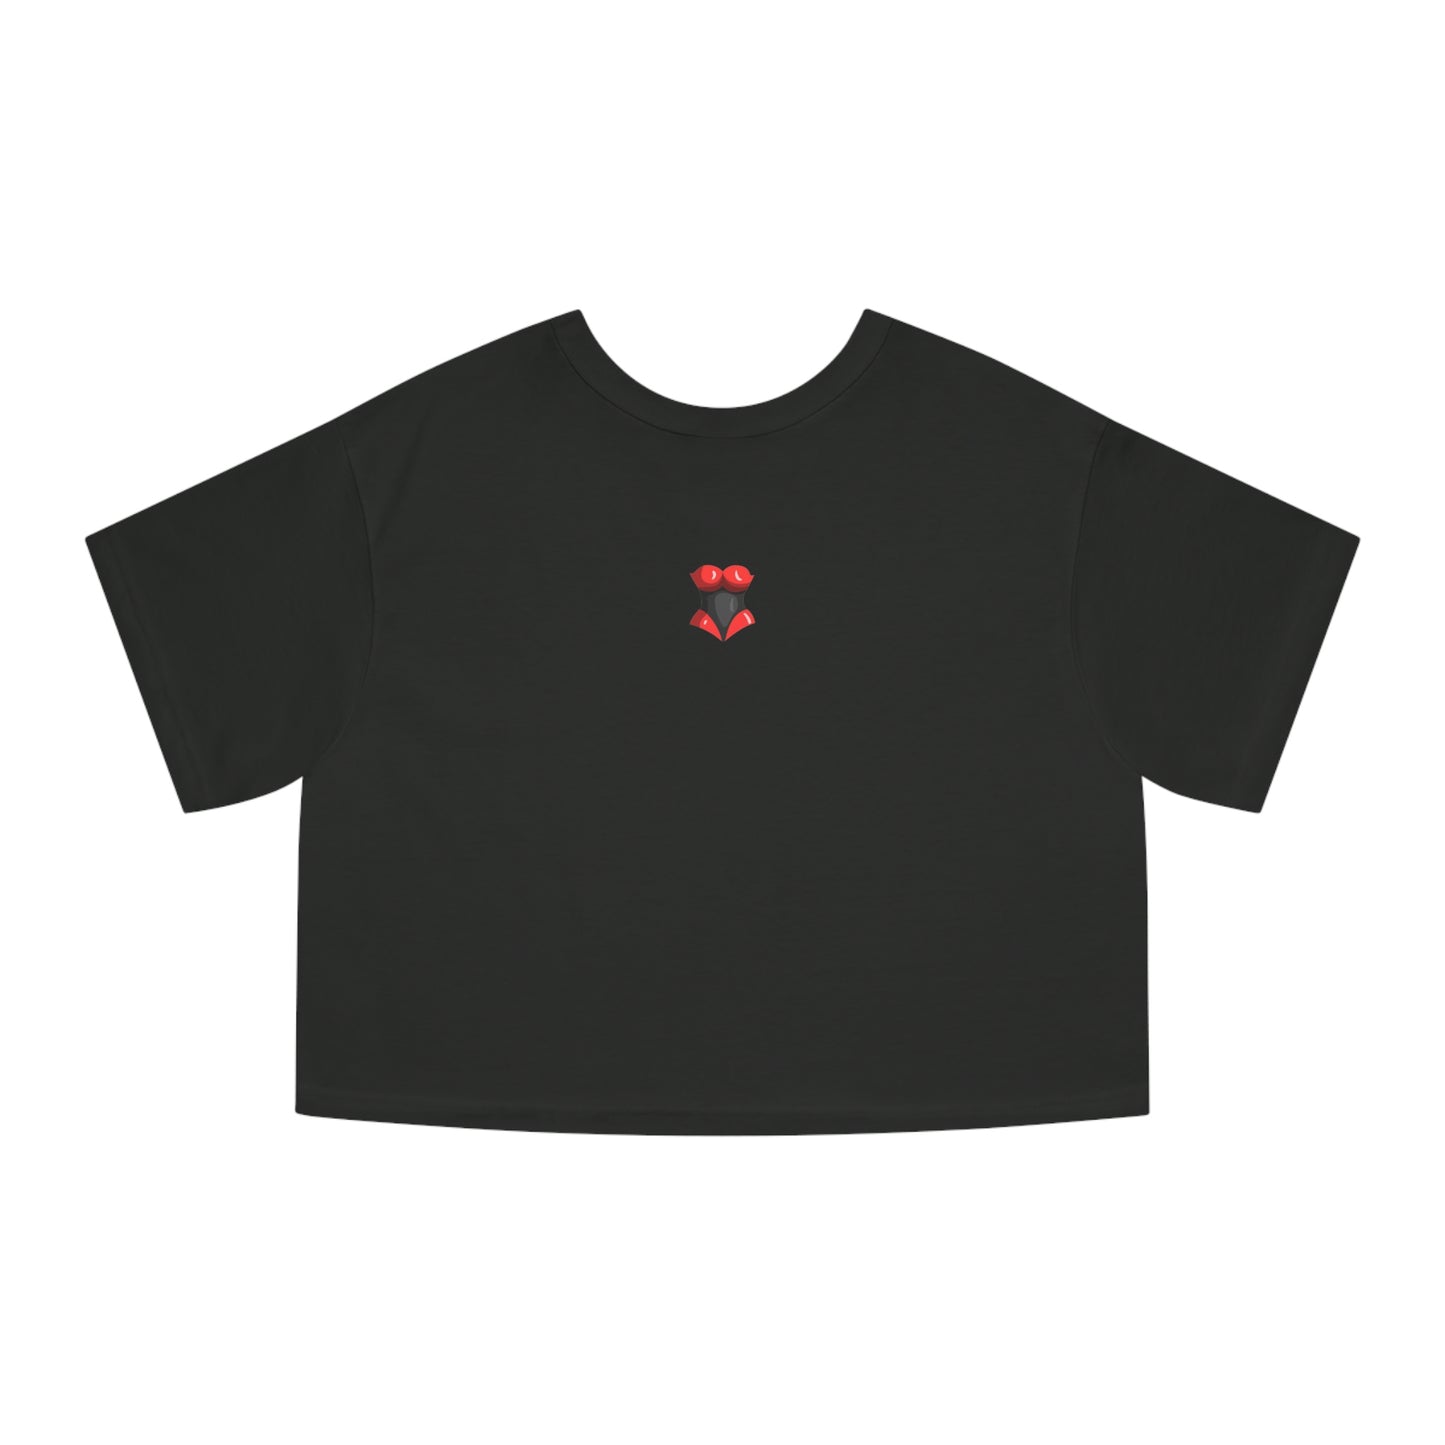 The Dominant Smile | Champion Cropped T-Shirt